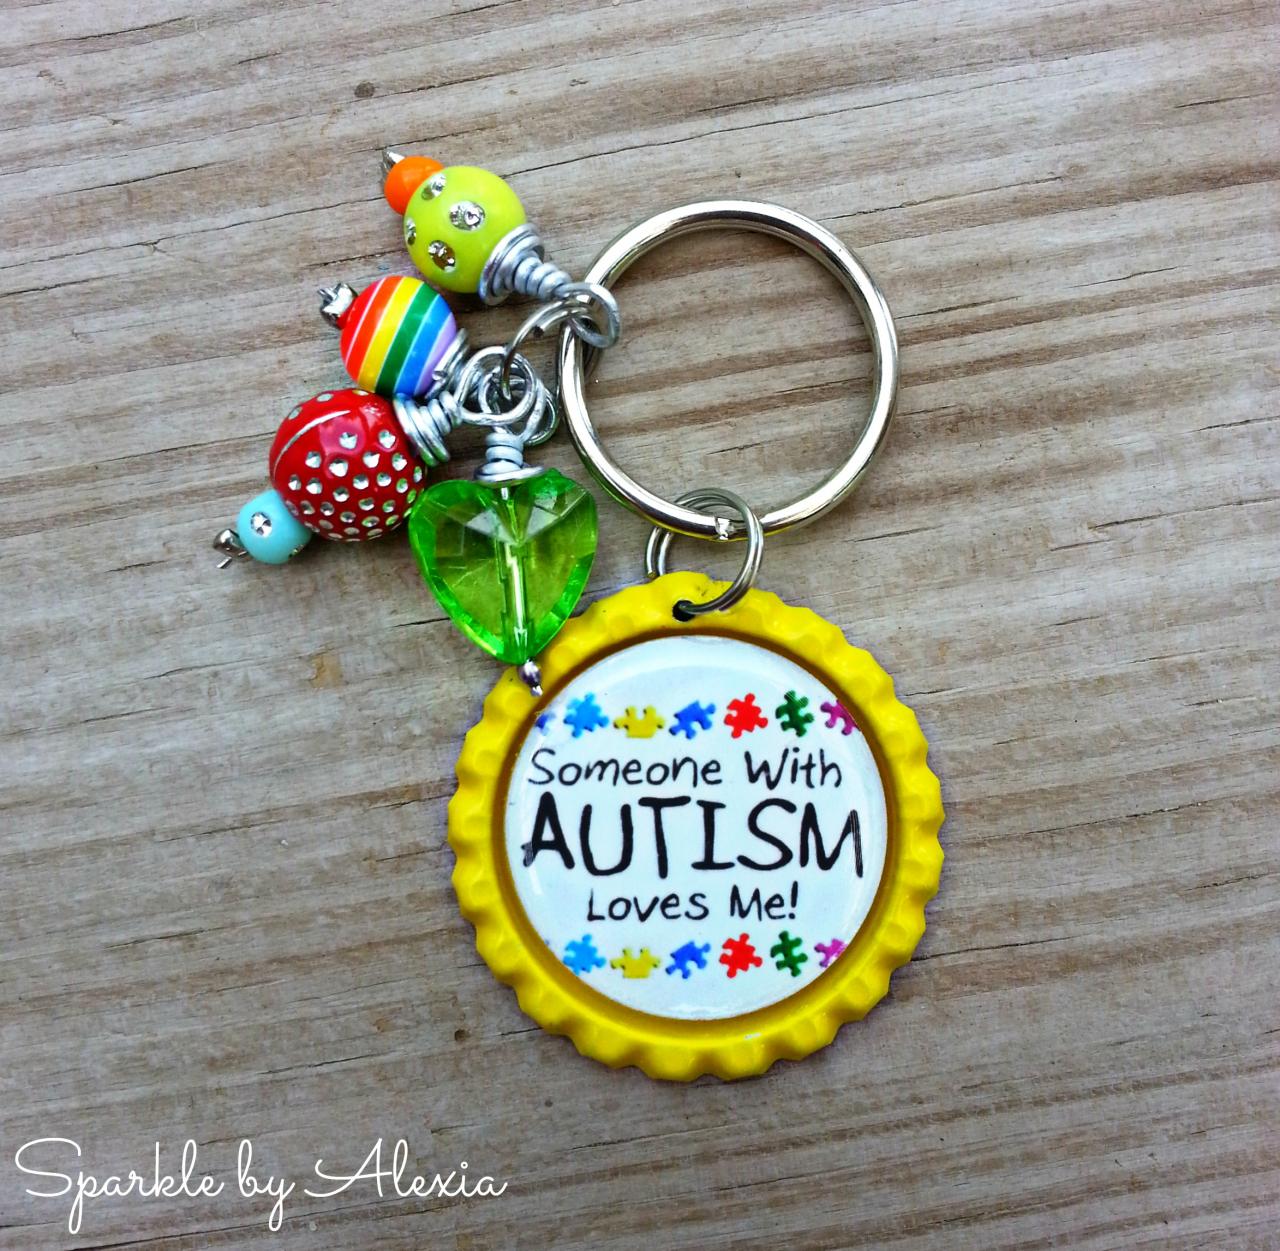 Autism Awareness Key Chain "someone With Autism Loves Me!"